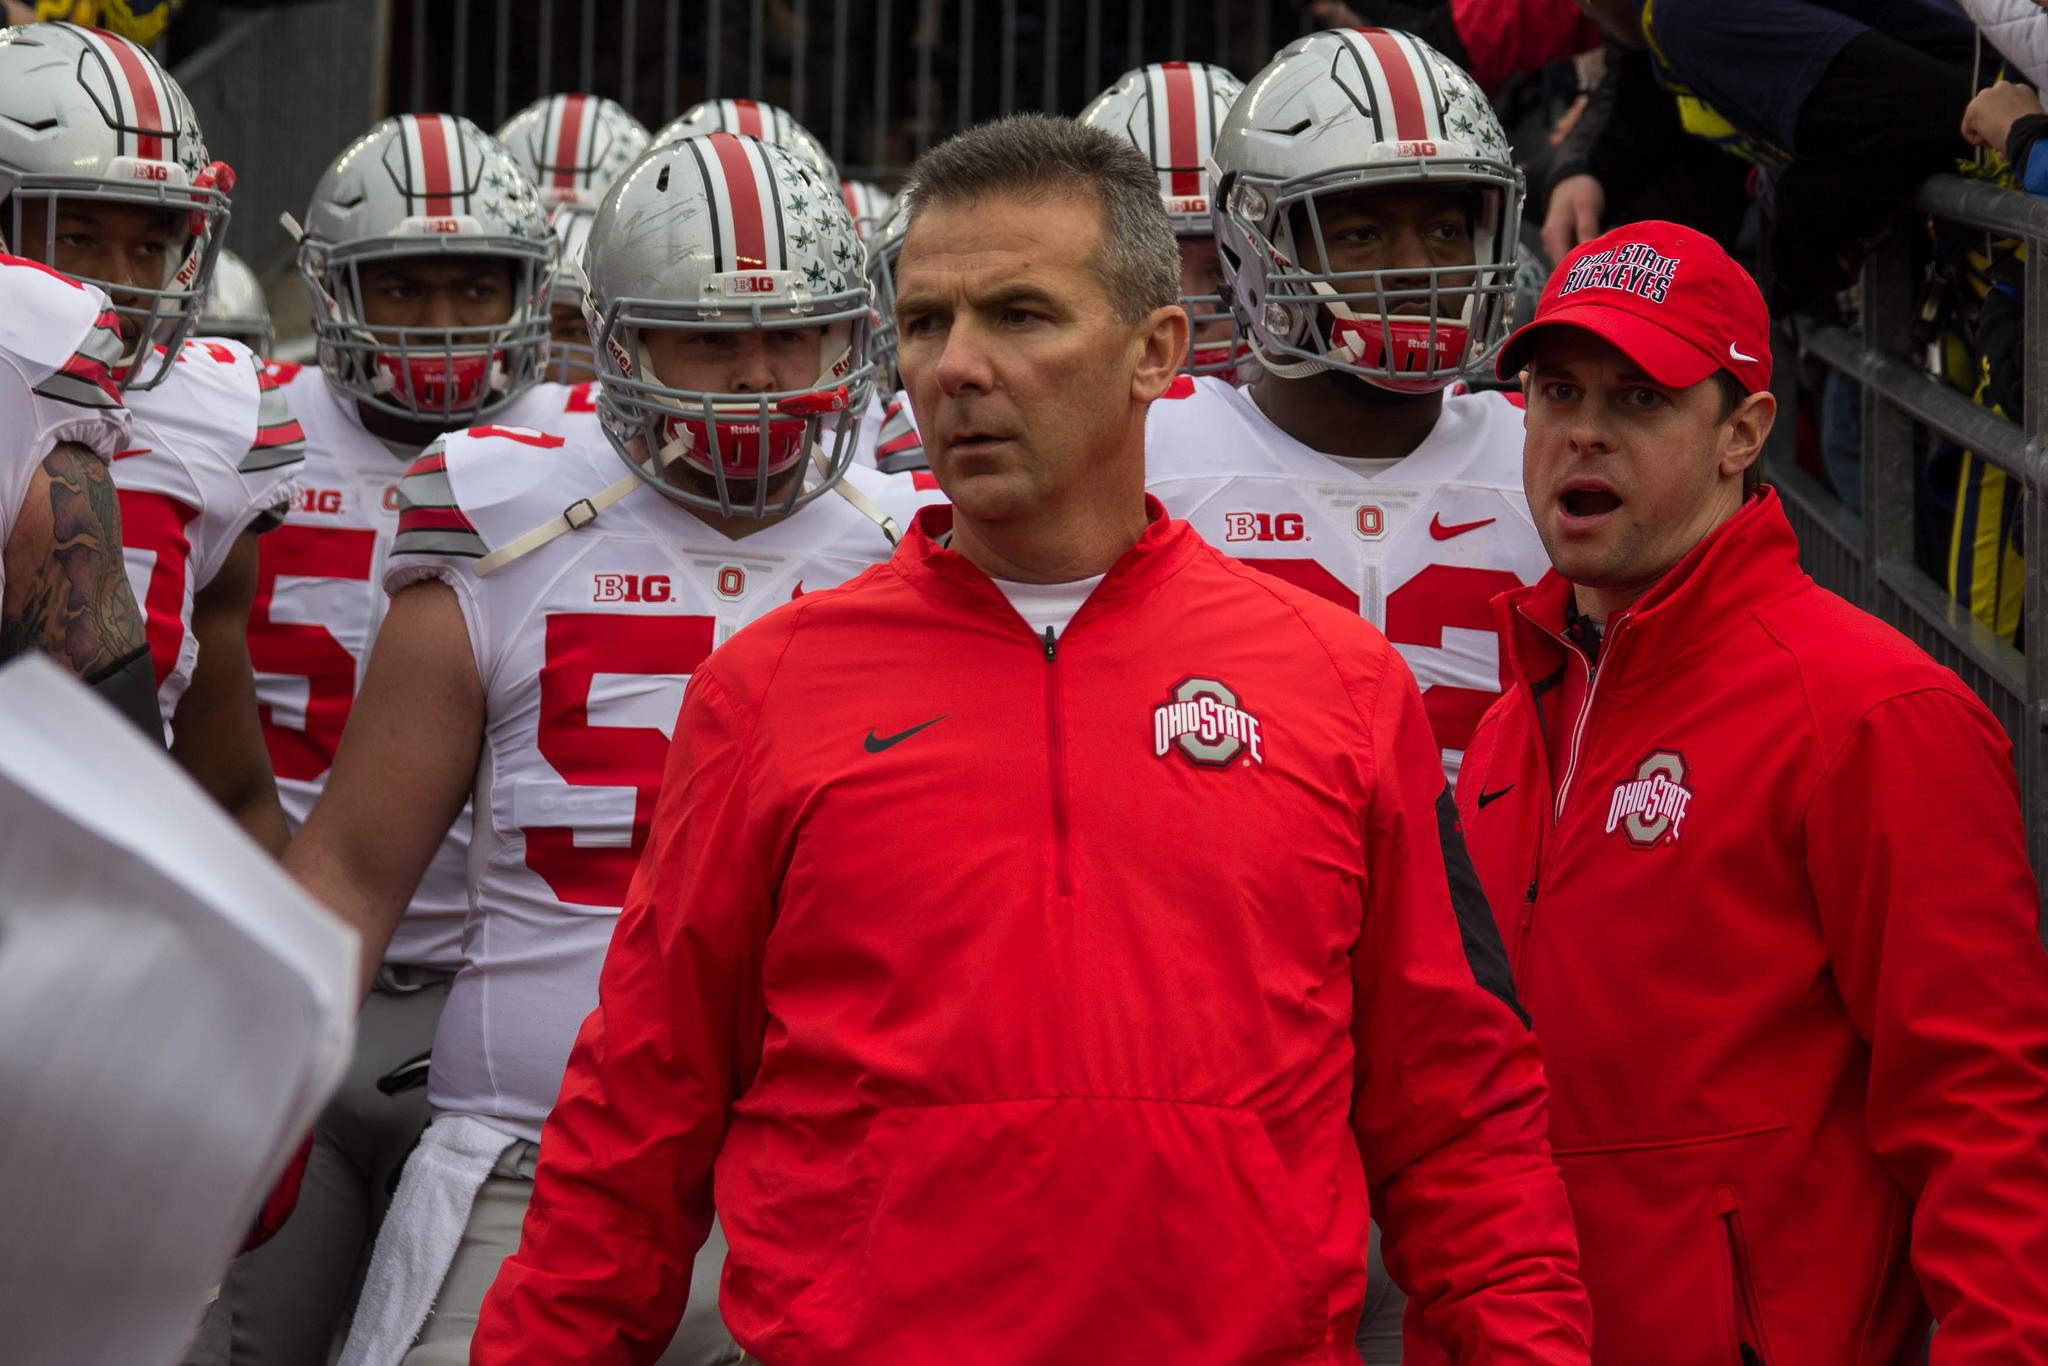 Days after his news conference, Urban Meyer finally apologizes to Courtney Smith